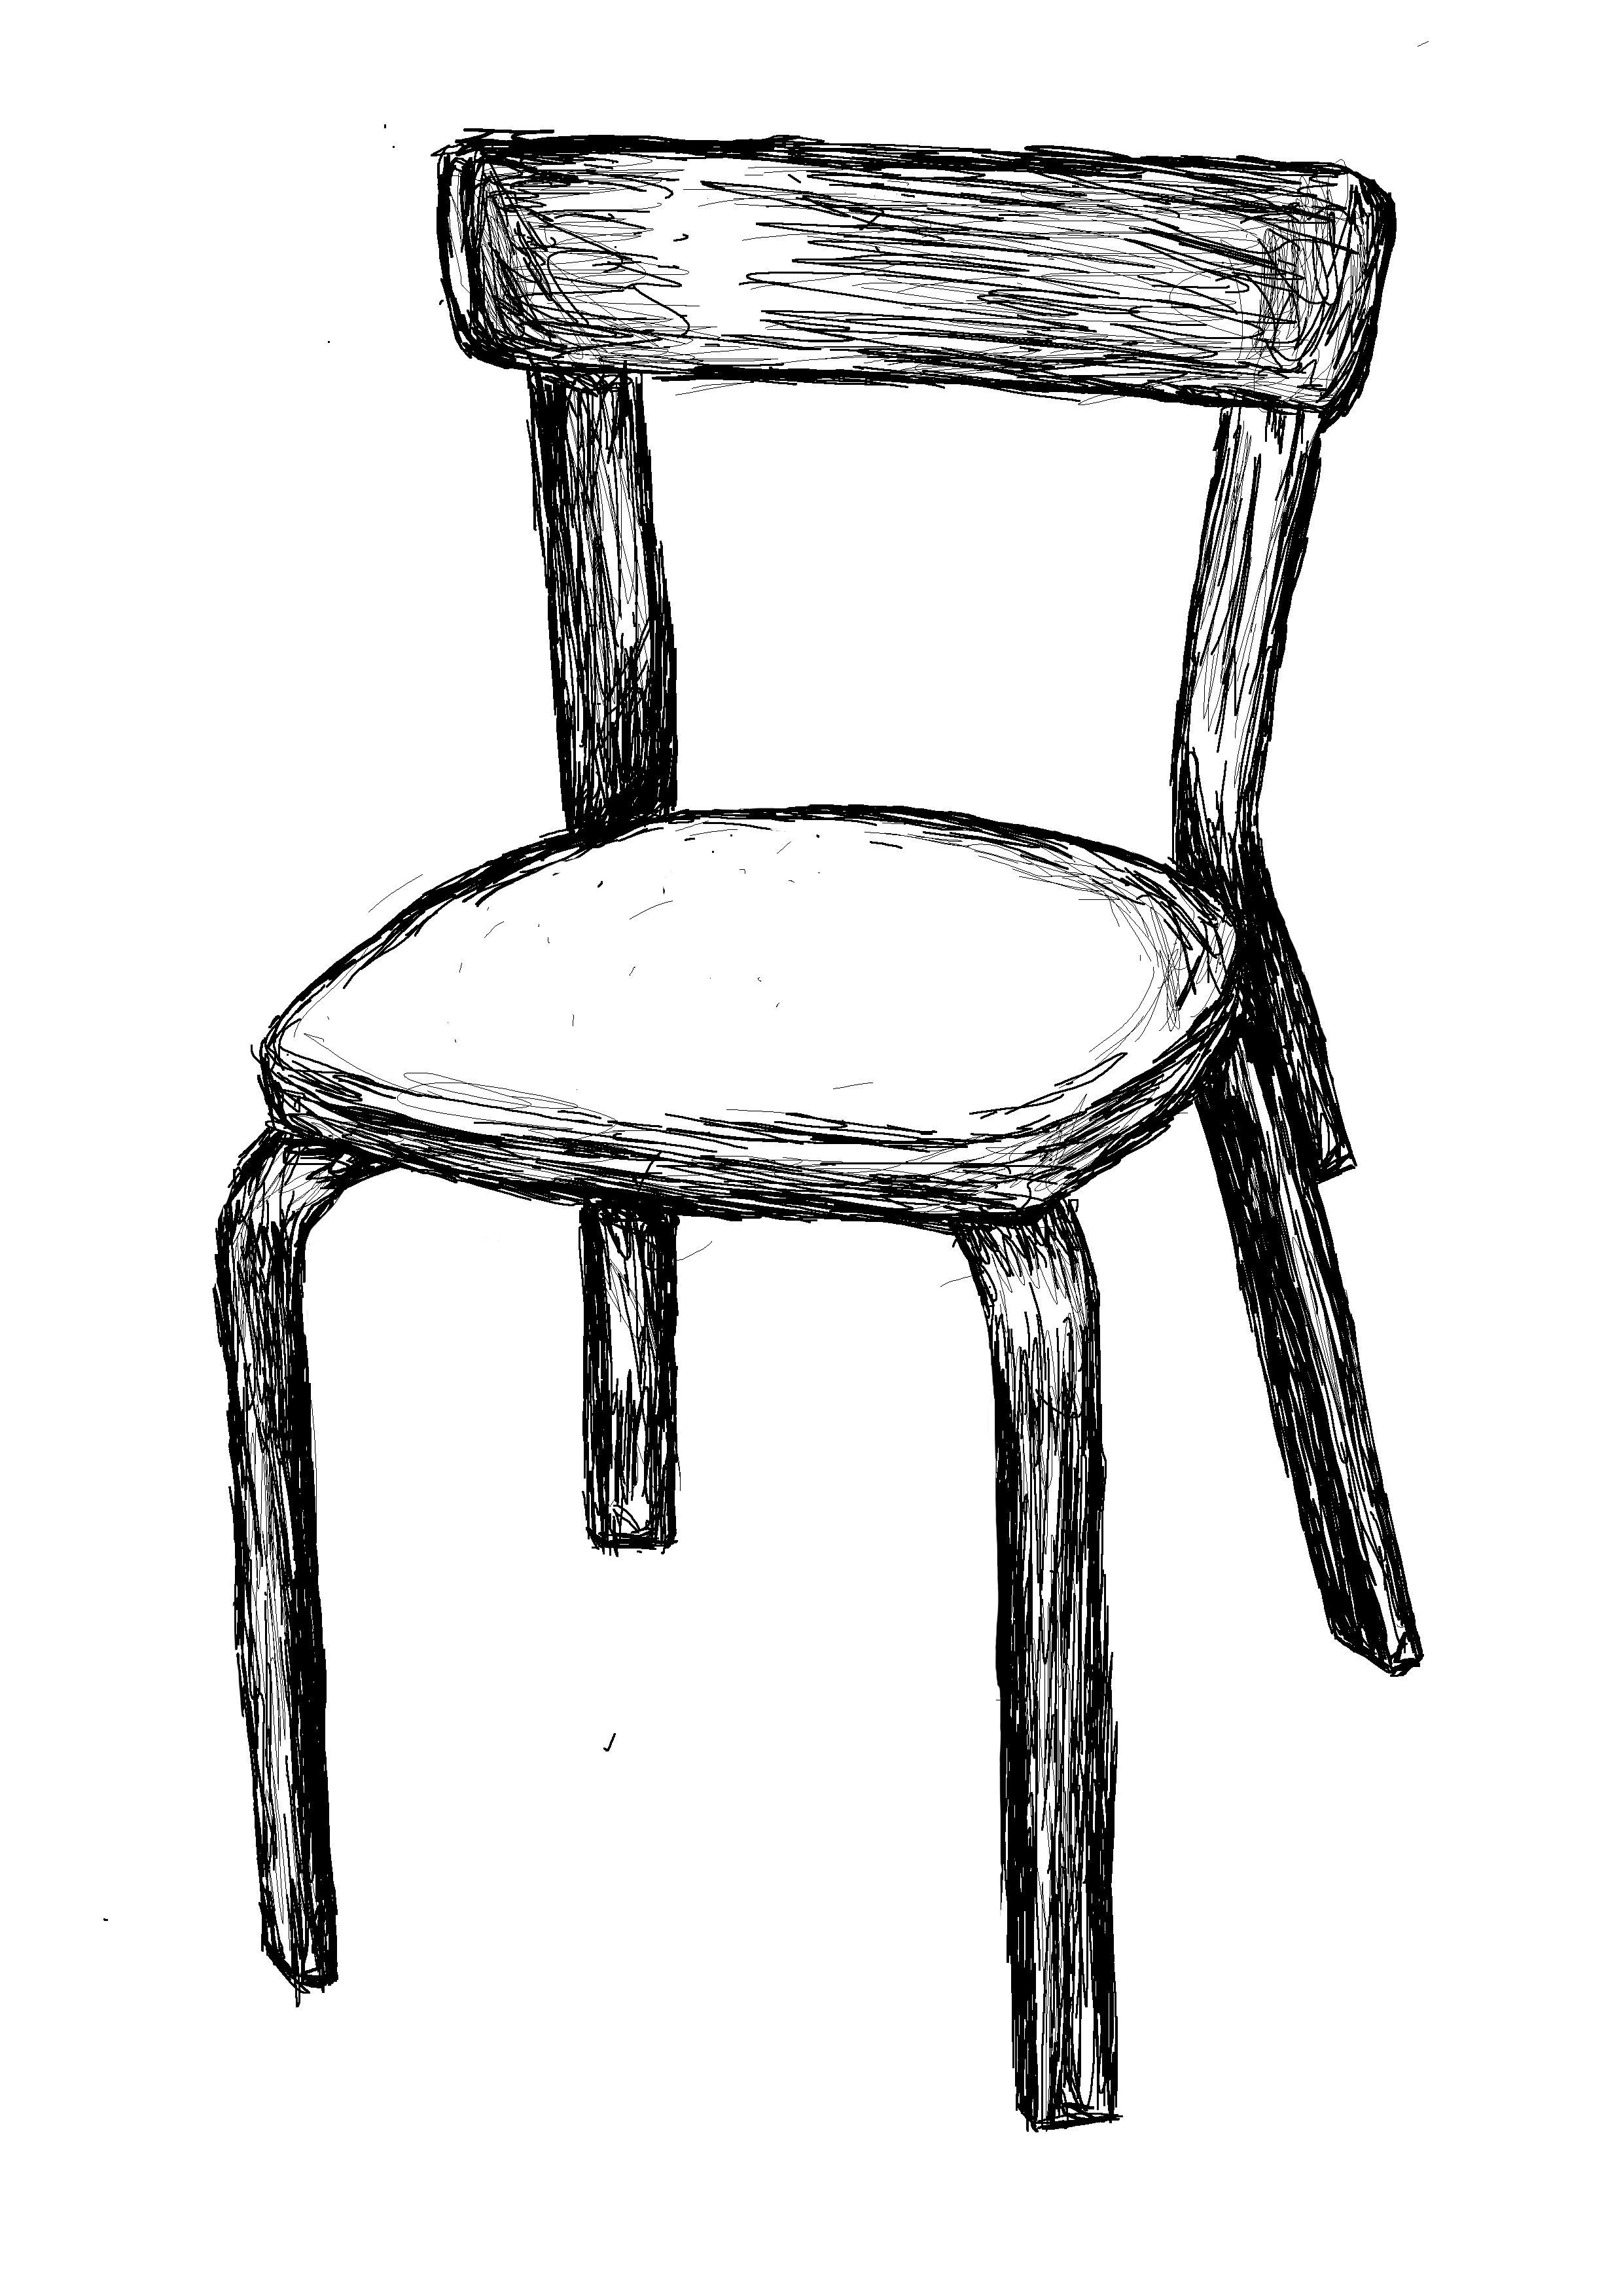 File:Chair-black and white drawing.jpg - Wikimedia Commons